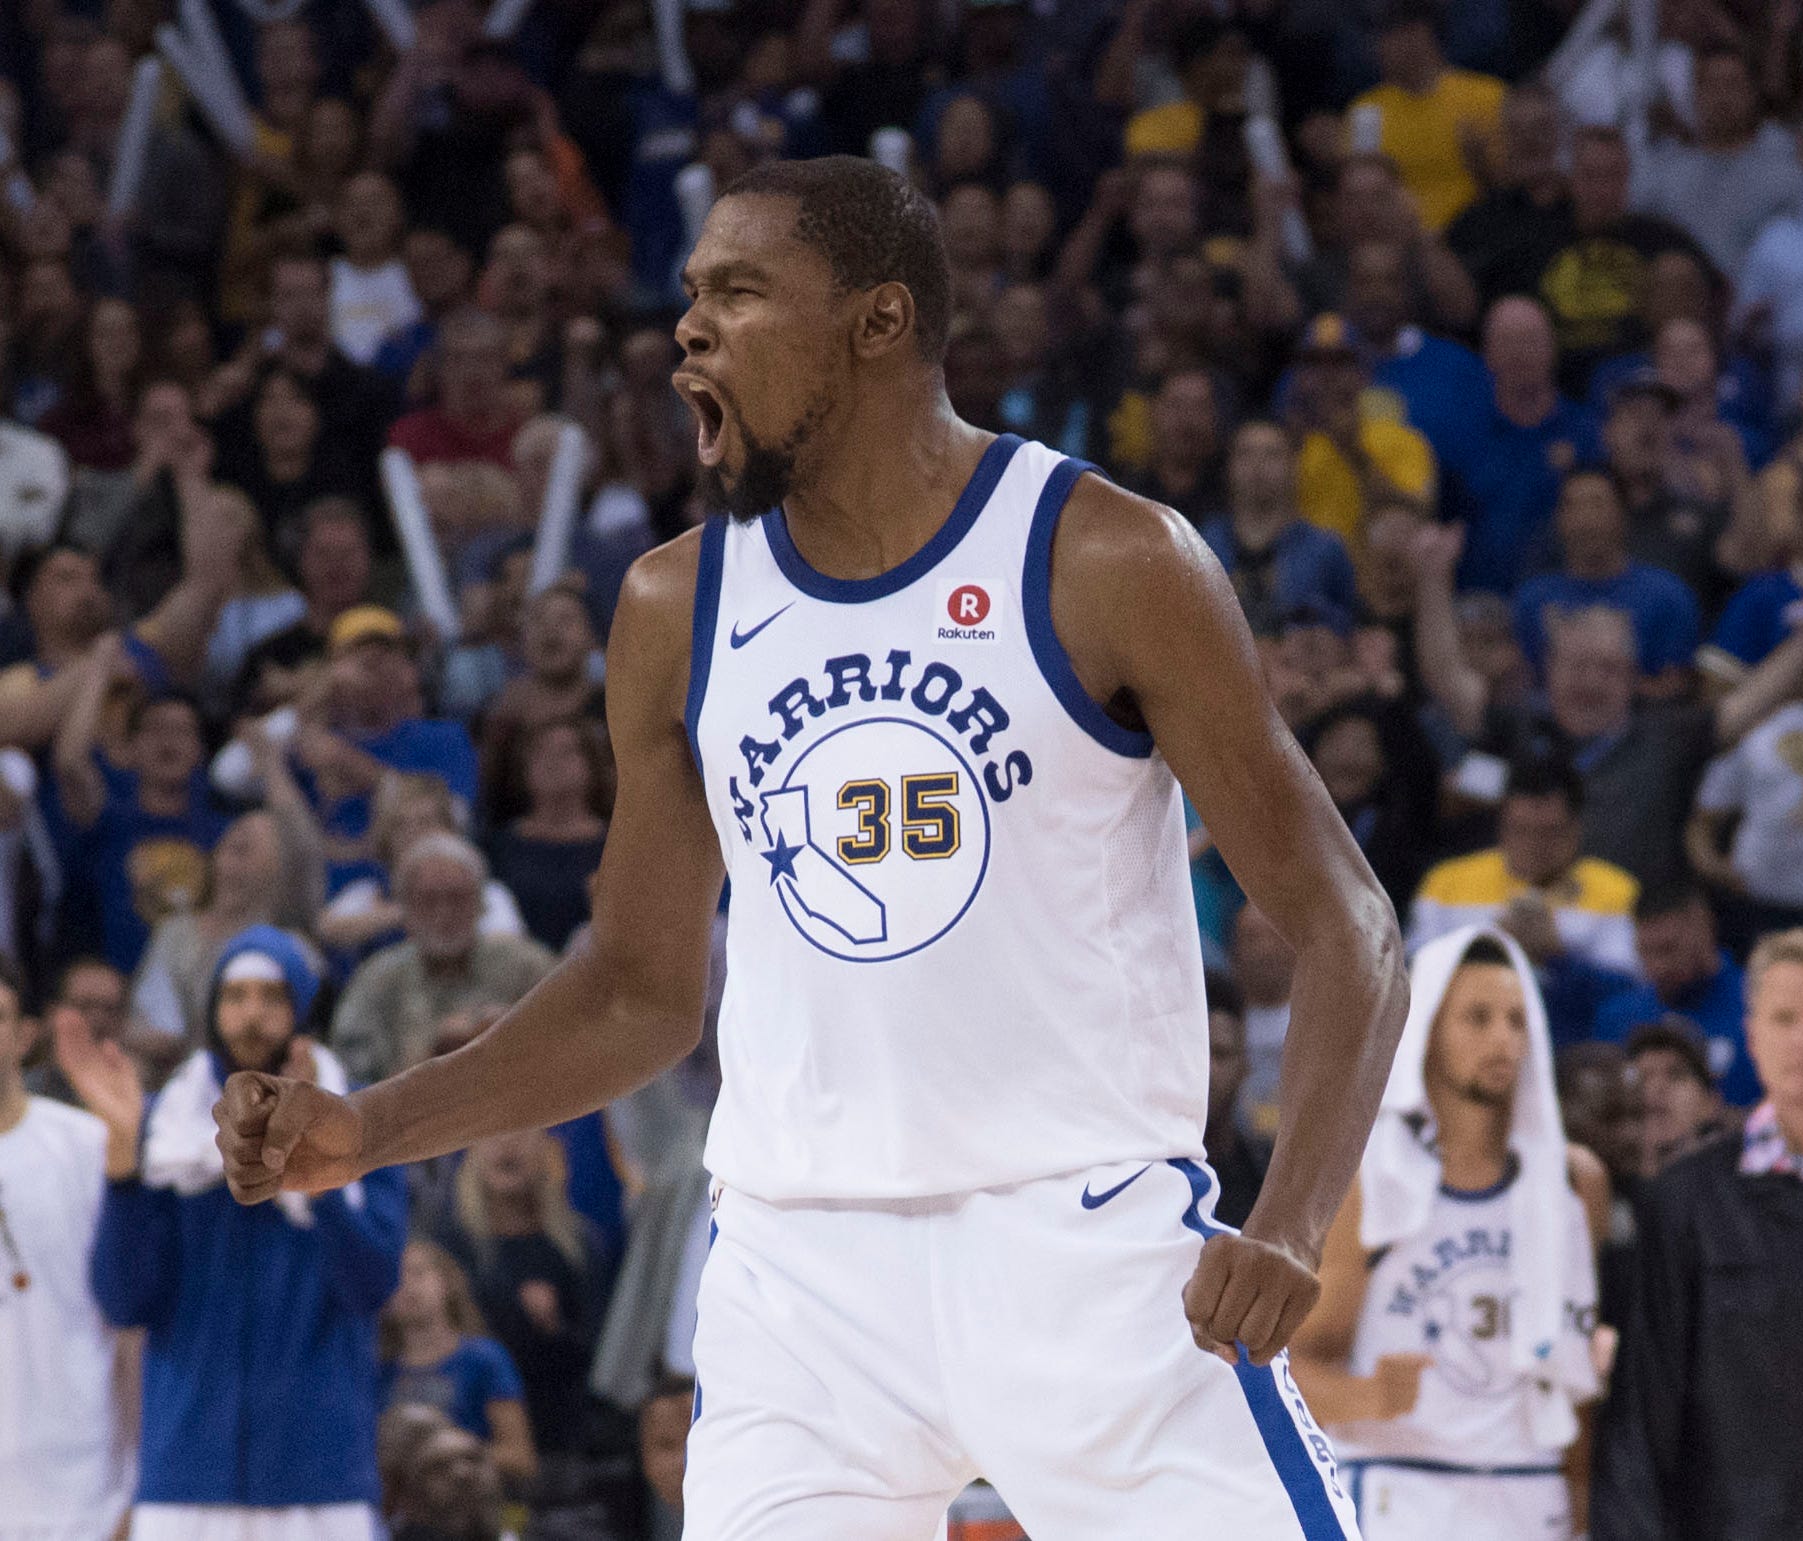 Golden State Warriors forward Kevin Durant (35) celebrates against the Washington Wizards during the fourth quarter at Oracle Arena.